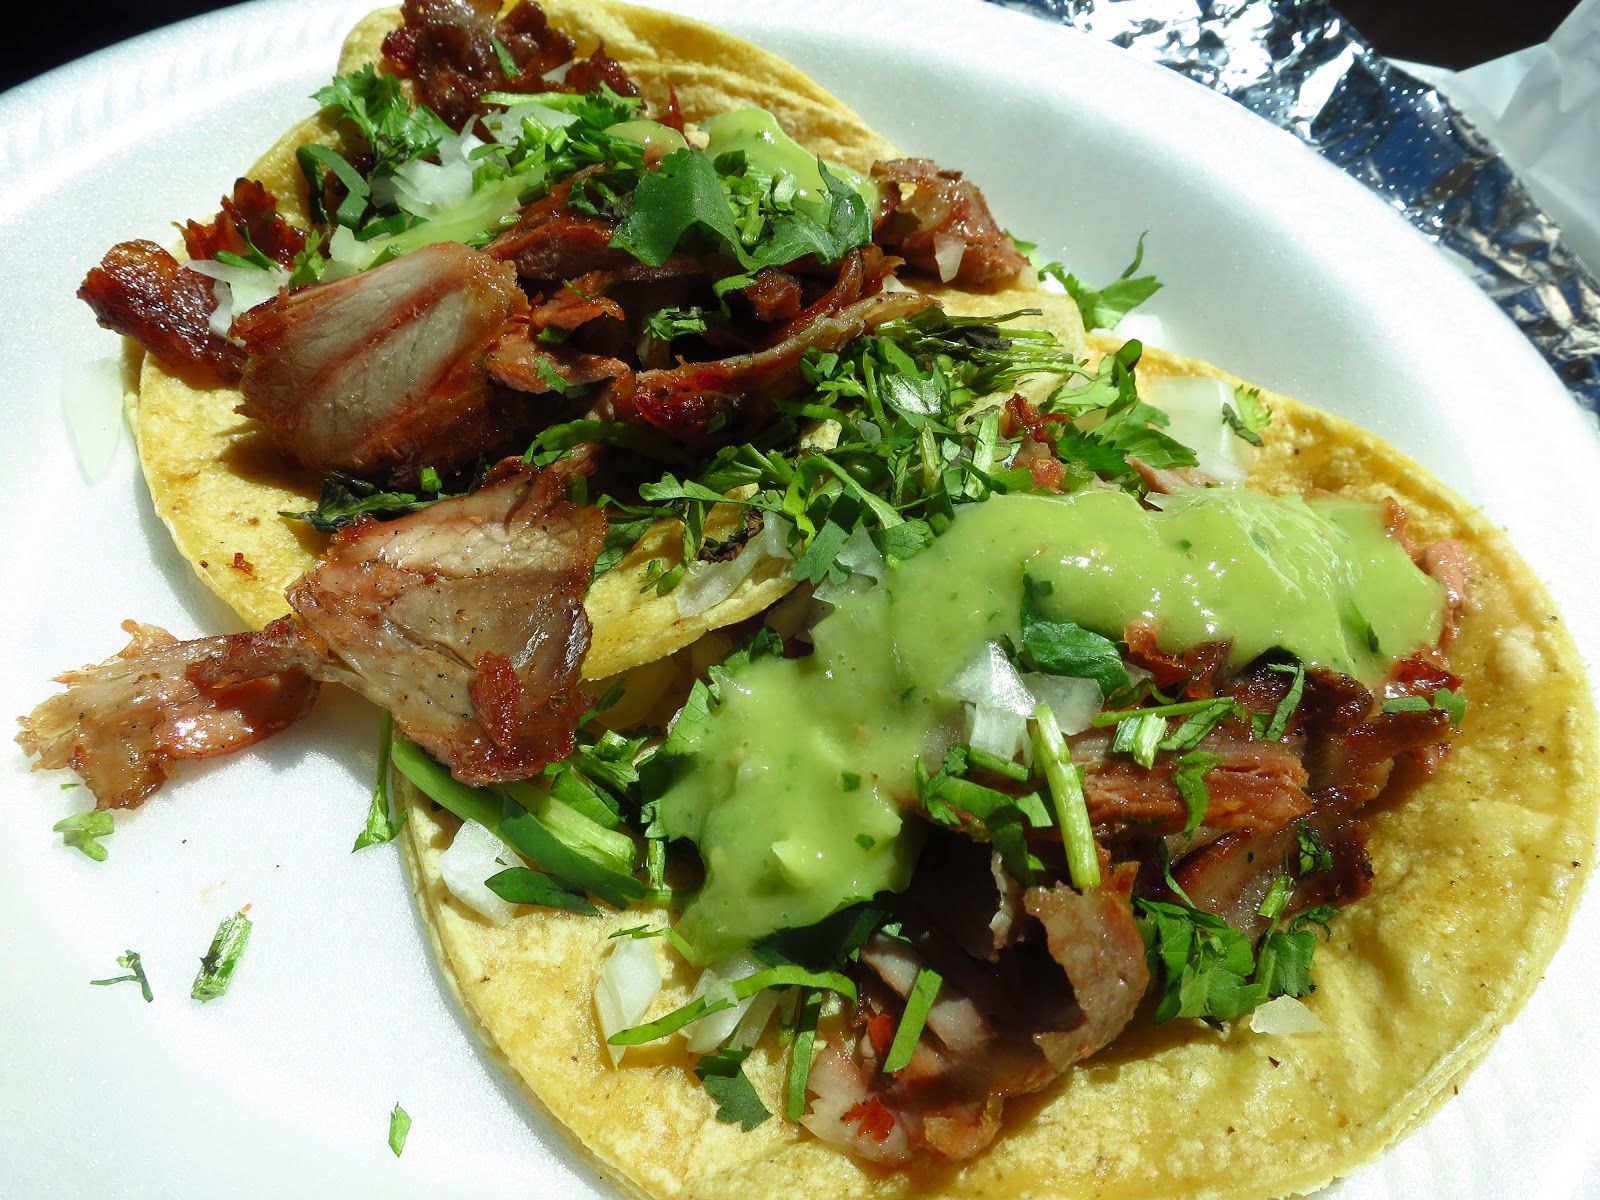 Smokin' Chokin' and Chowing with the King: Chicago's Street Taco Scene